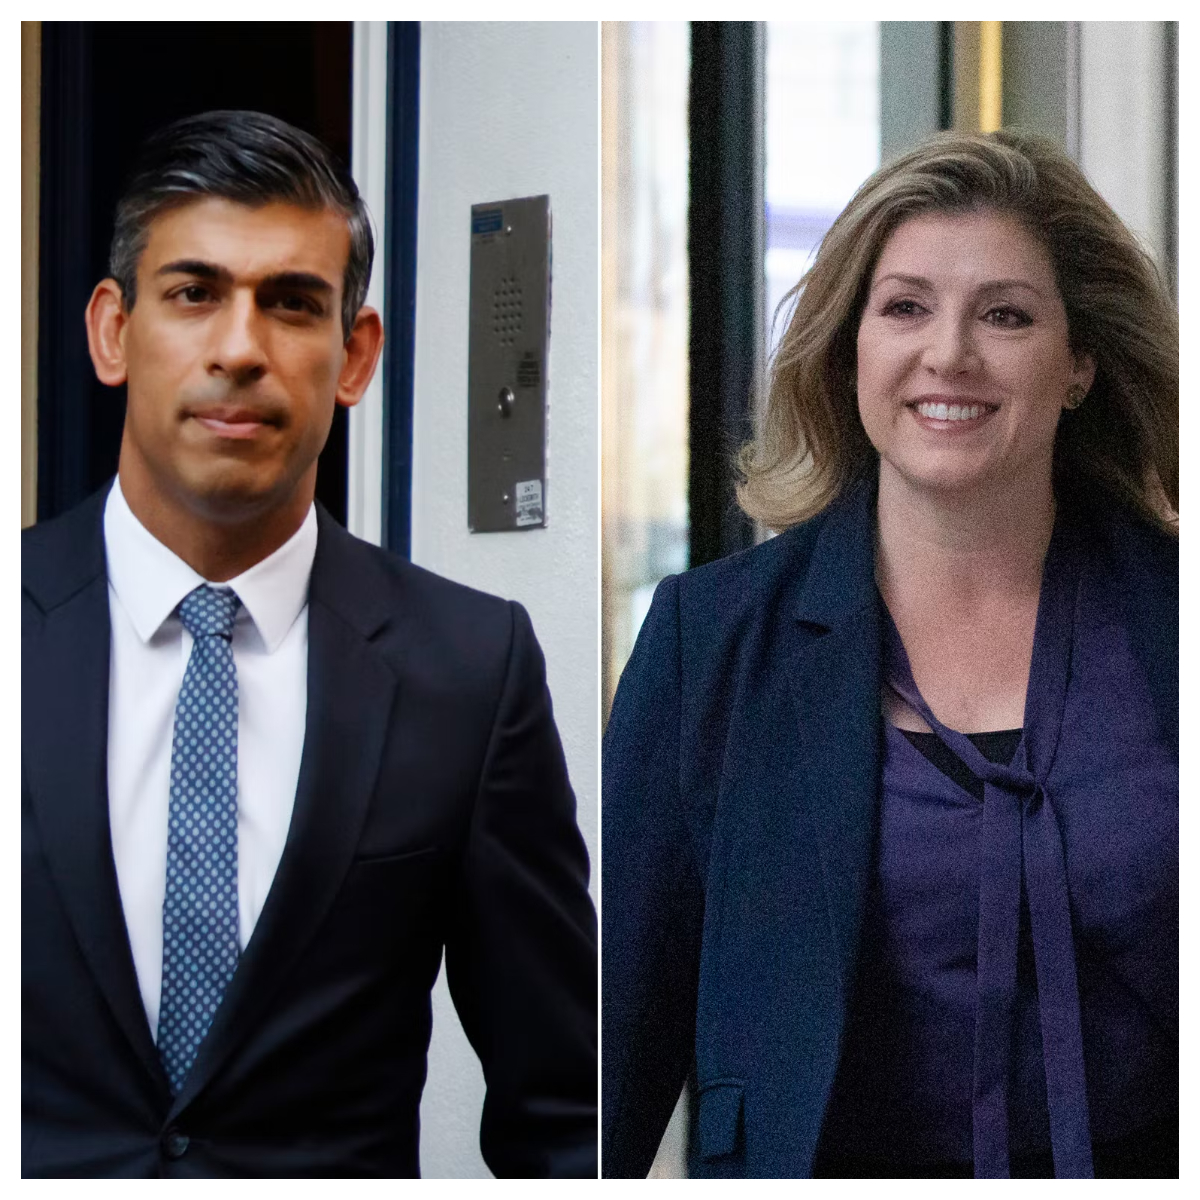 Sunak has Mordaunt's "full support" as she withdraws from race